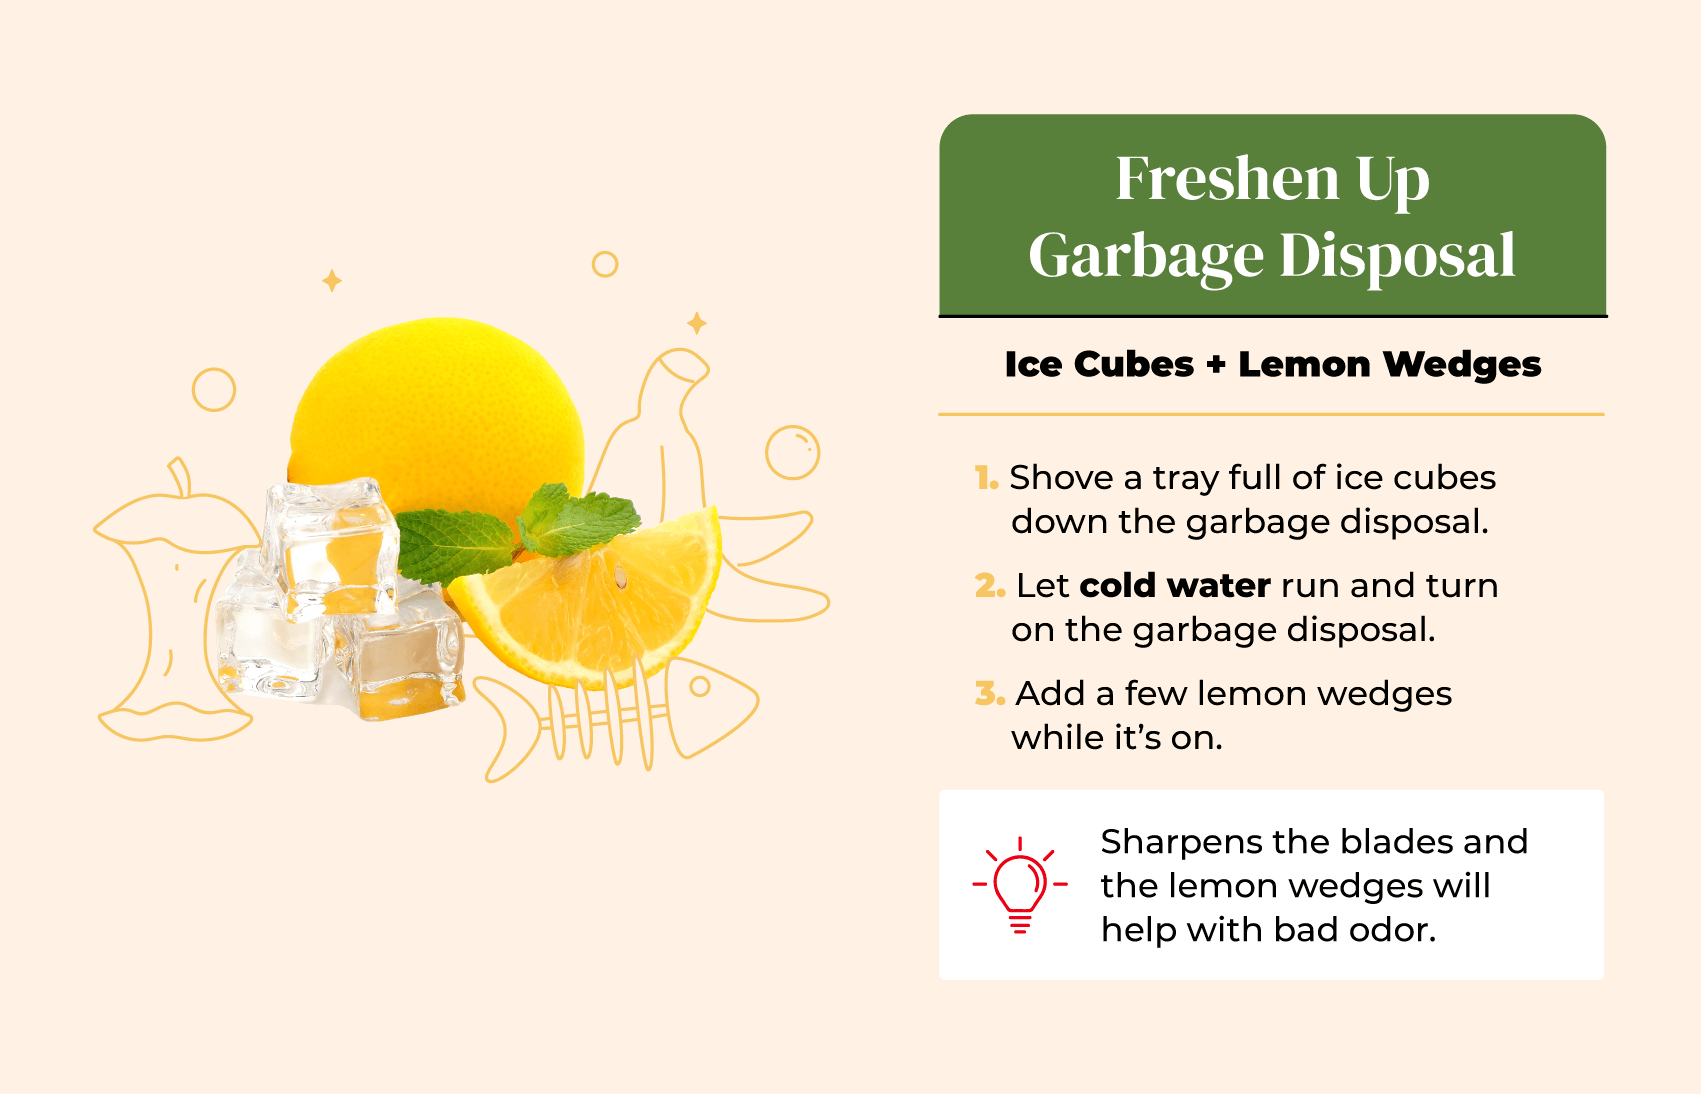 Eco-friendly cleaning hack to freshen up your garbage disposal using ice cubes and lemon wedges.